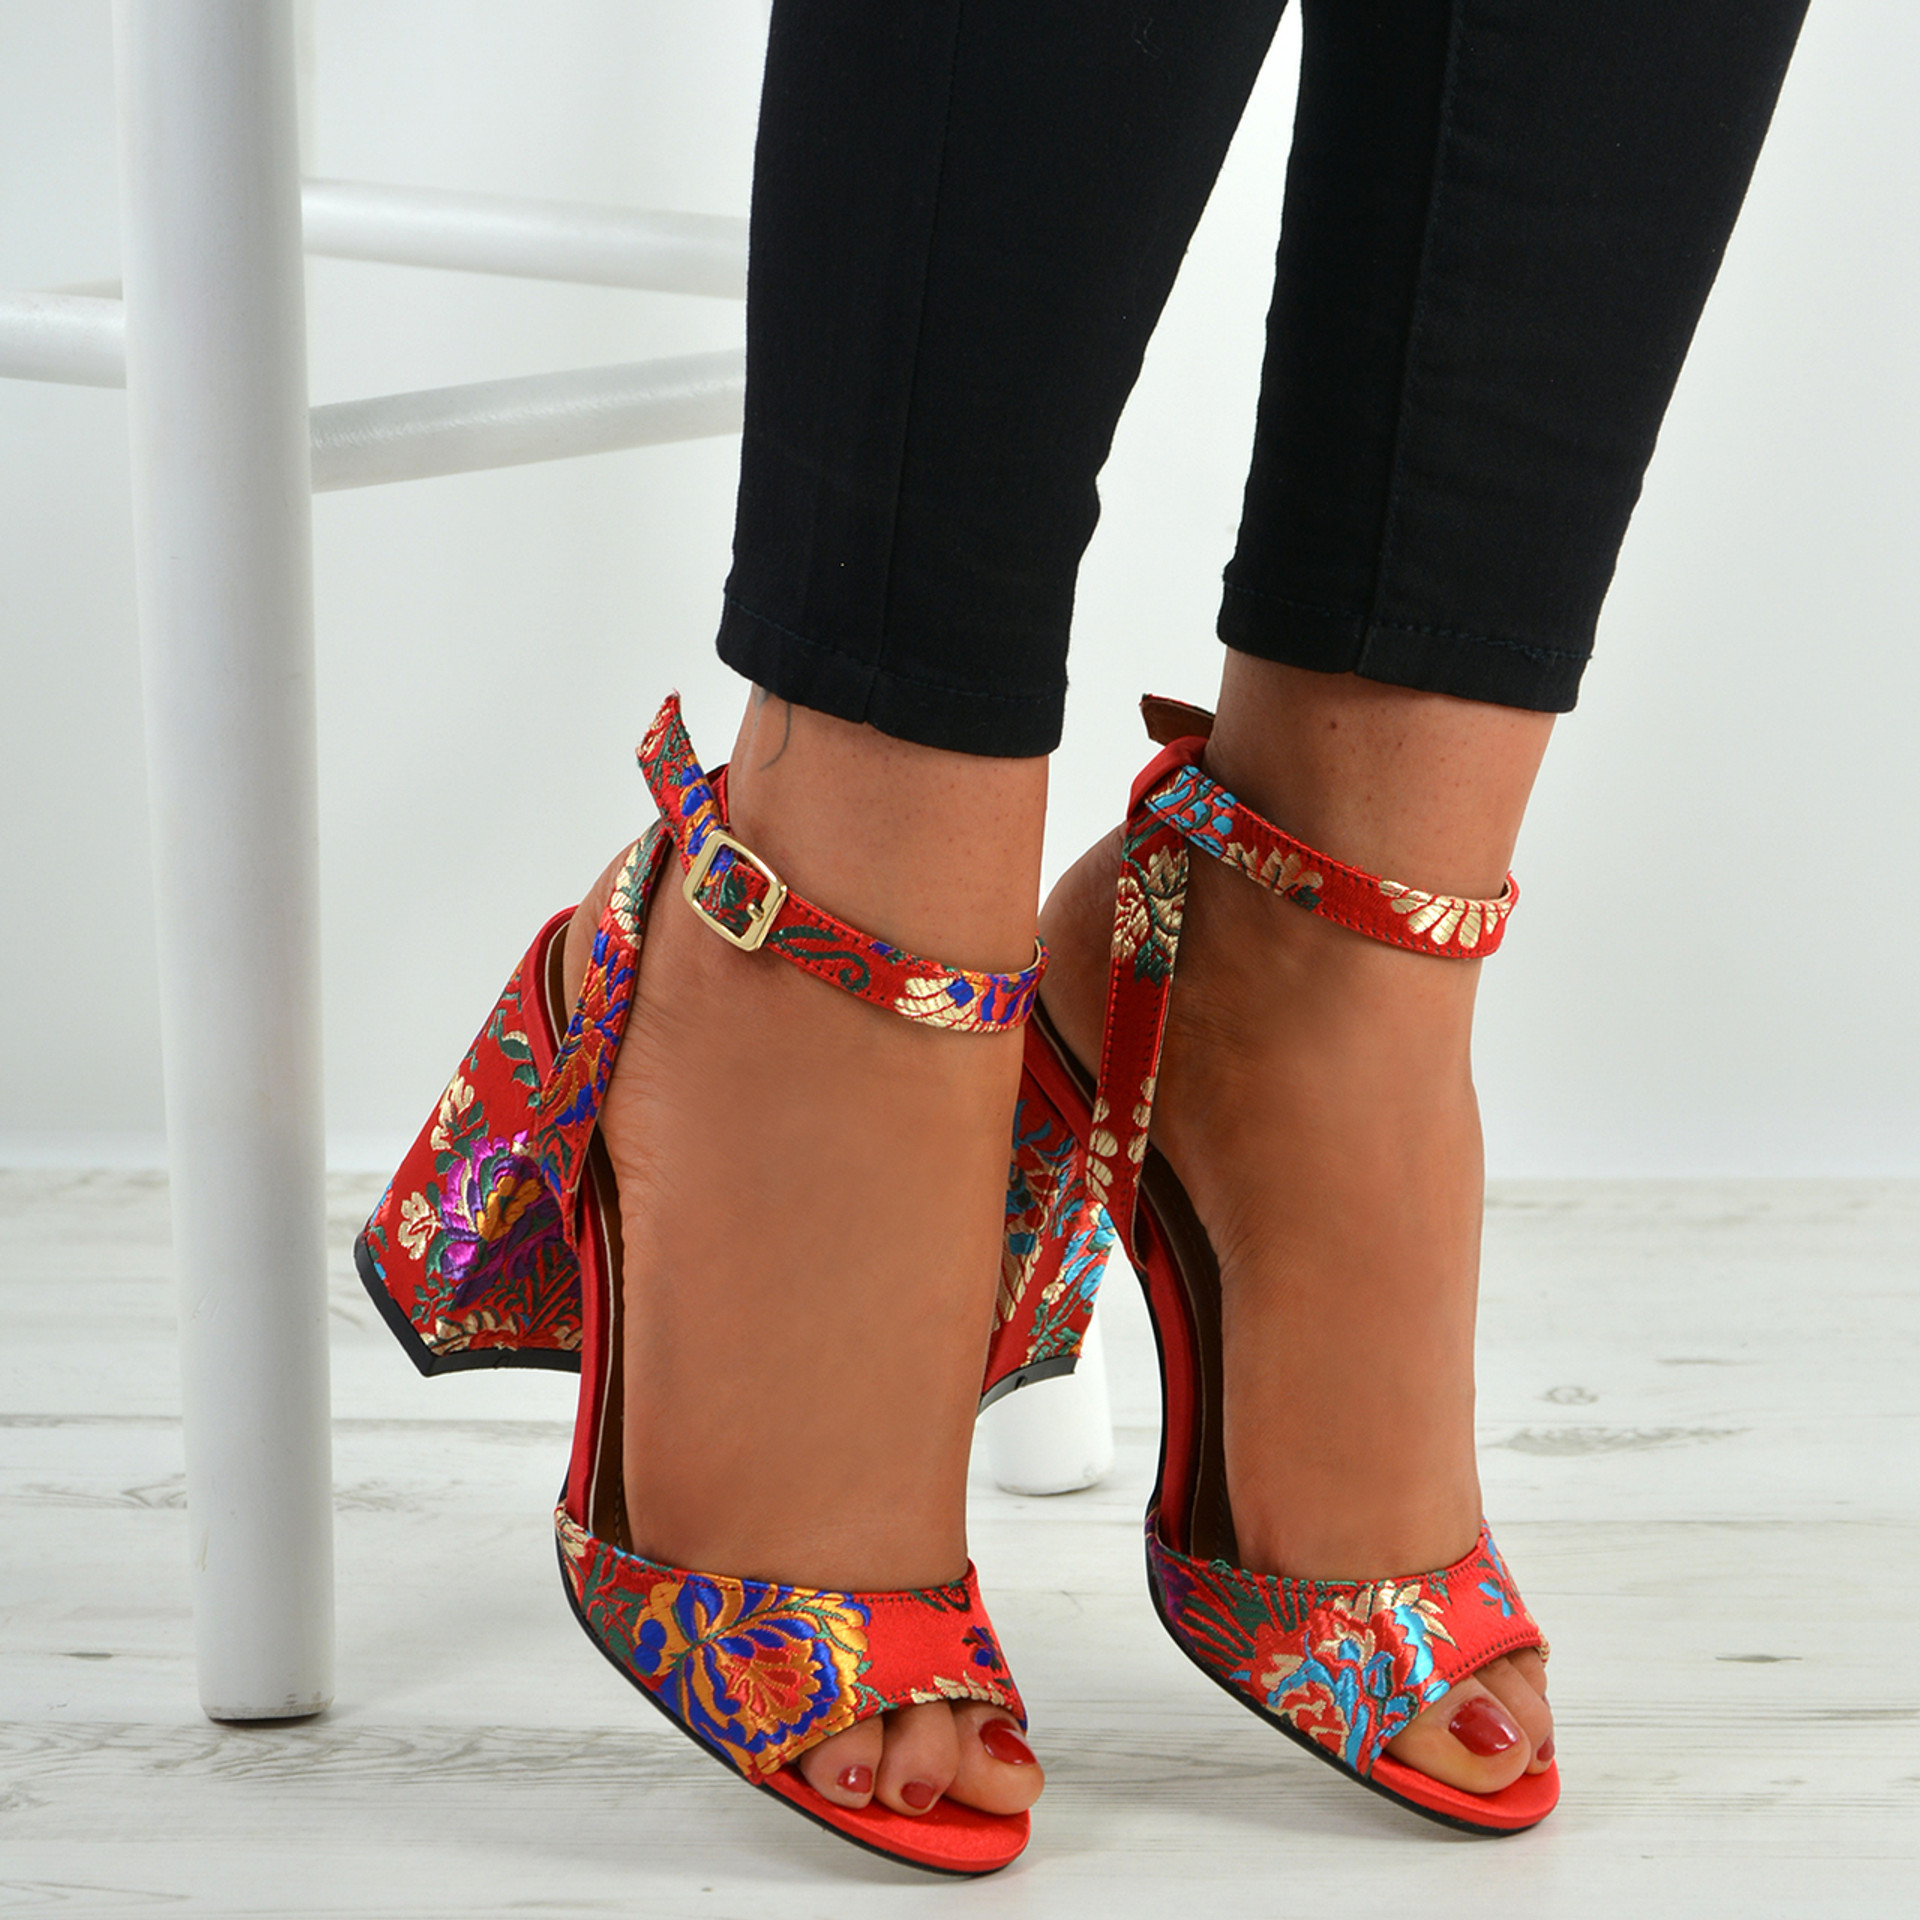 Marilyn Red Floral Sandals